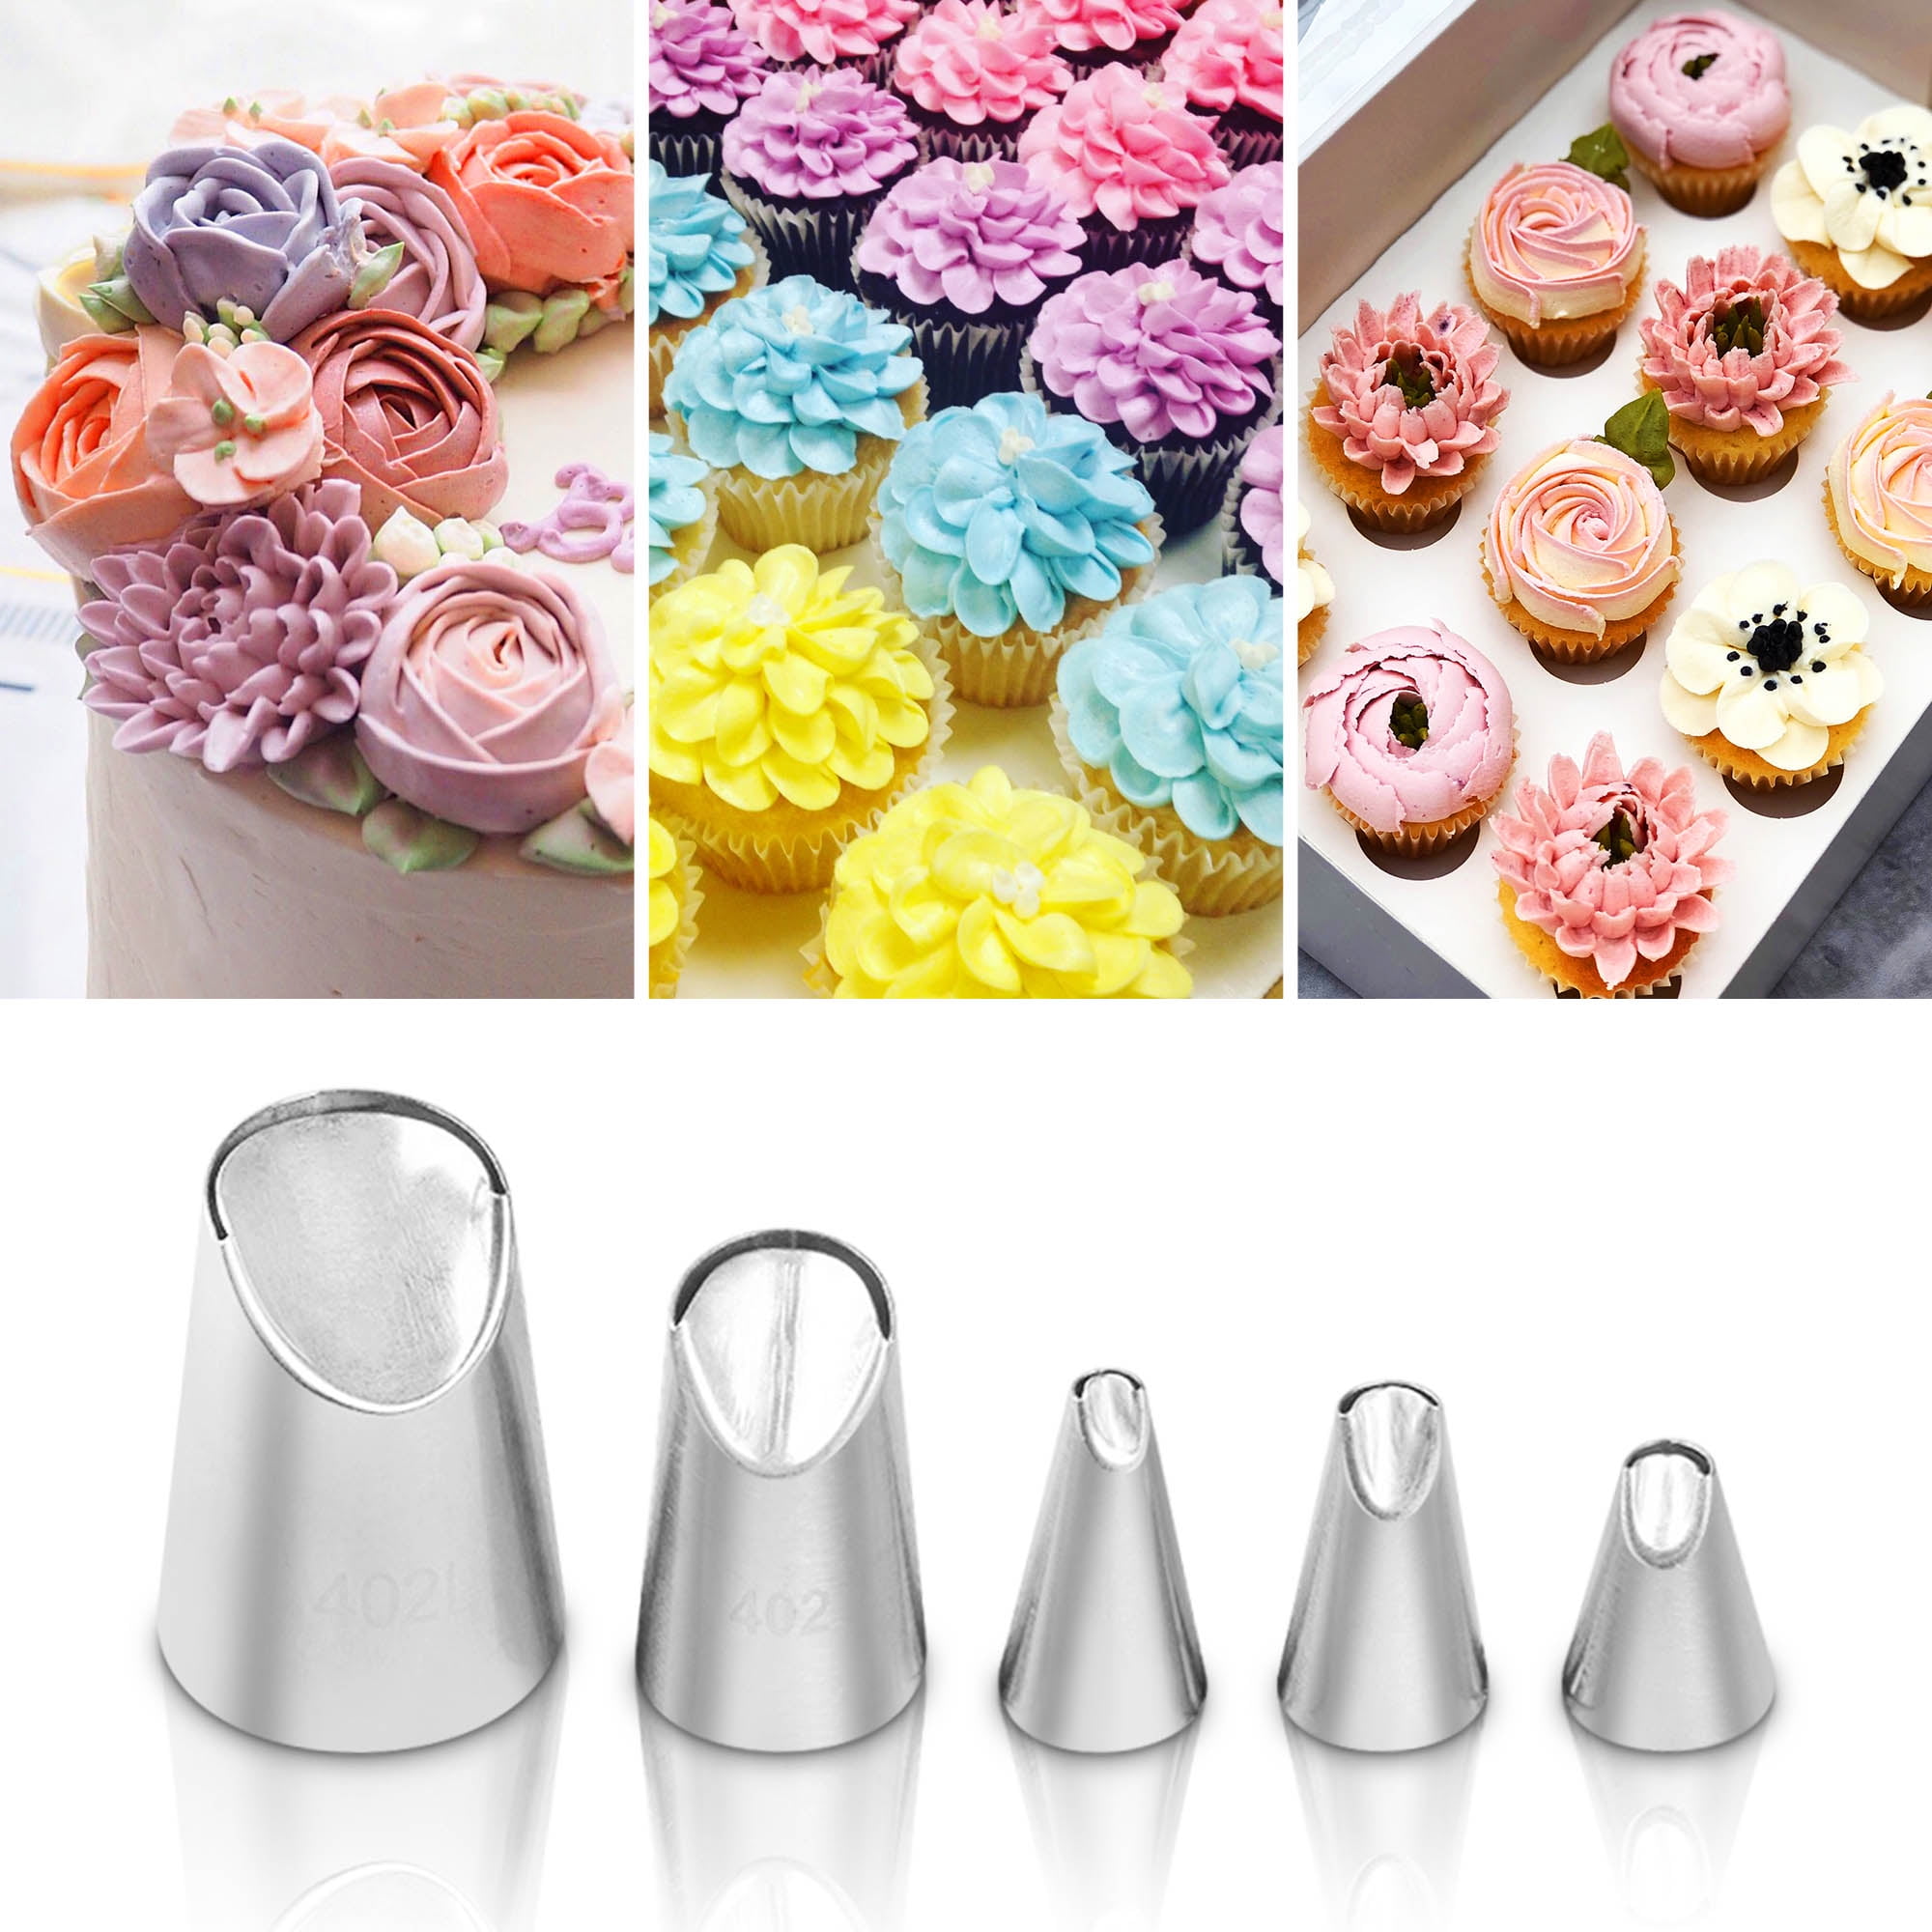 Icing Piping Nozzles Set Russian  Decorating Tips Cupcake Cake Cream Pastry Tool 